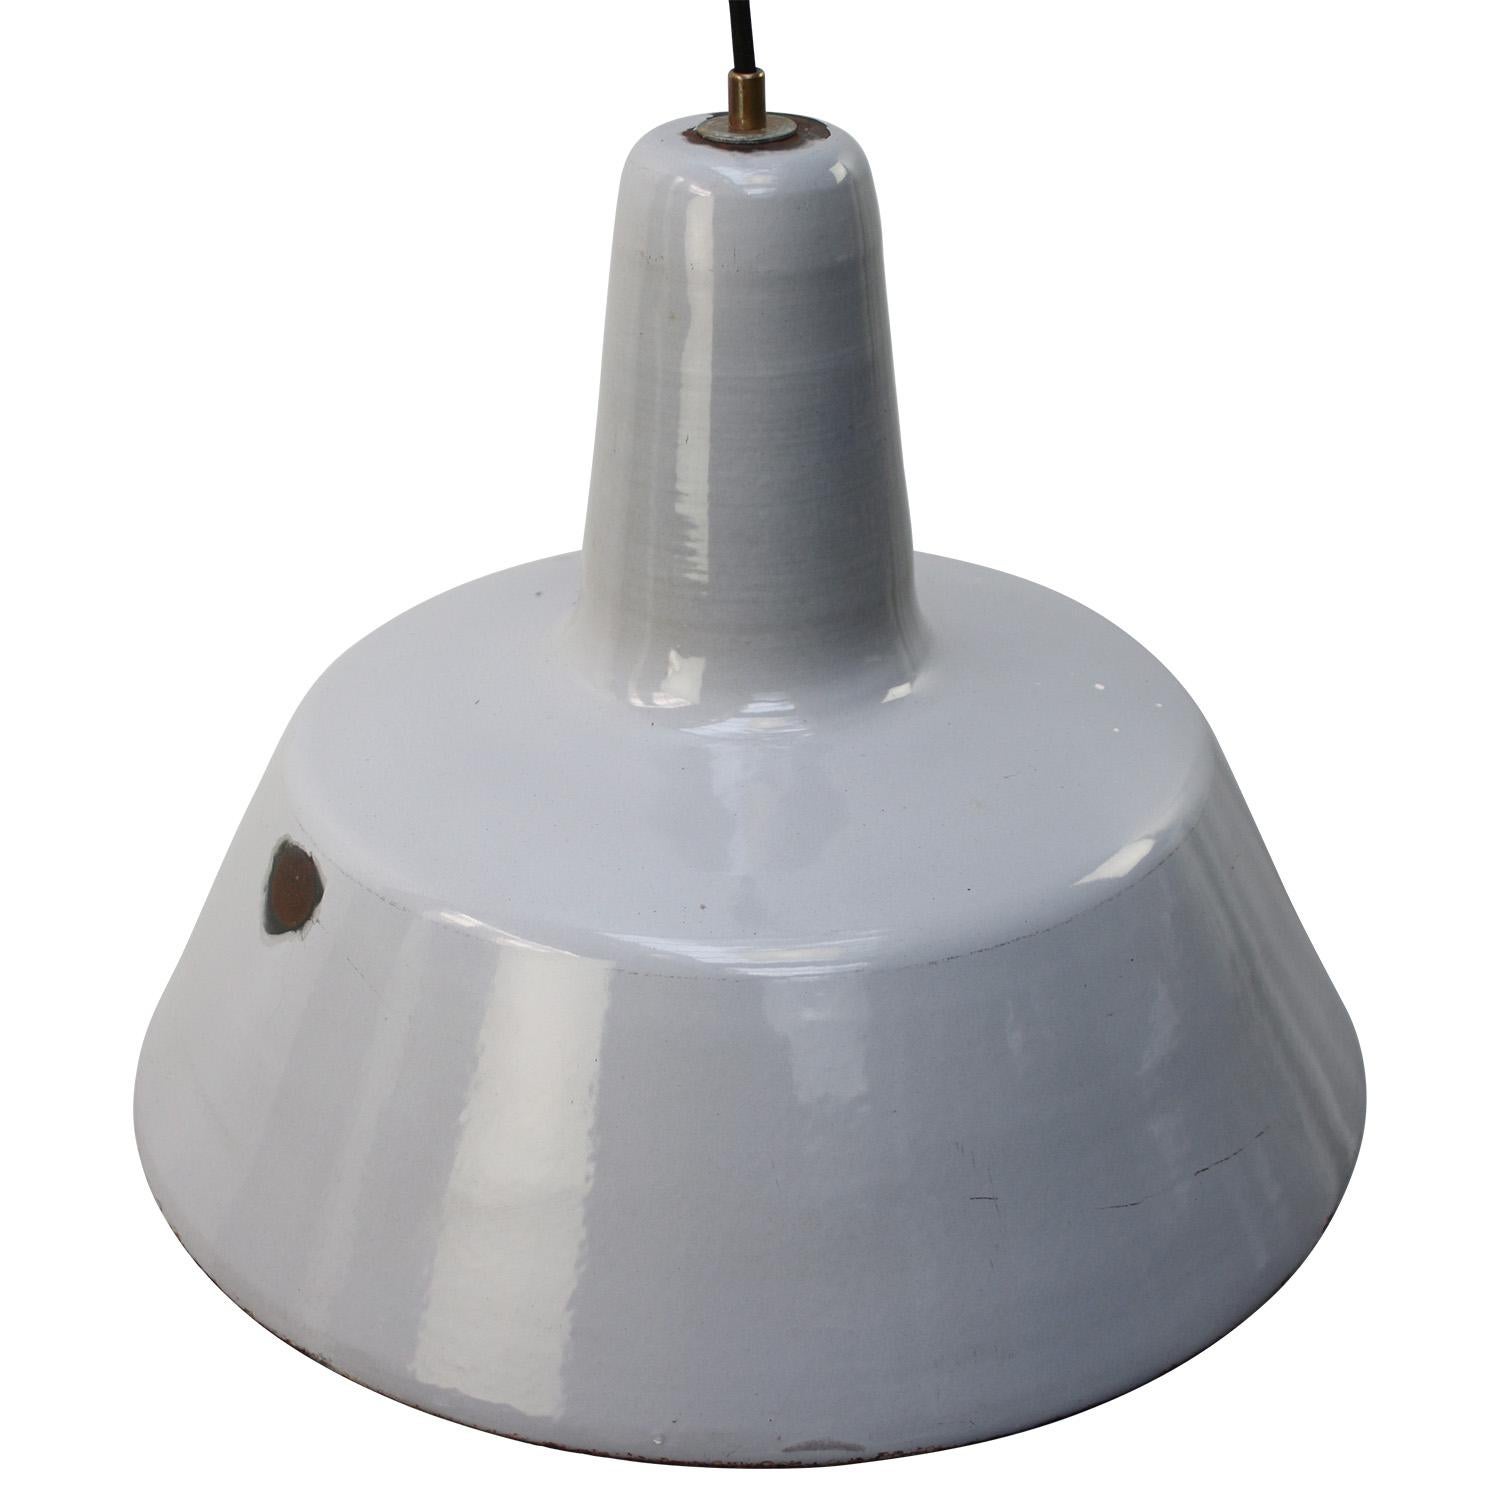 Industrial hanging lamp made by Philips, Holland
gray enamel white interior

Weight: 2.20 kg / 4.9 lb

Priced per individual item. All lamps have been made suitable by international standards for incandescent light bulbs, energy-efficient and LED